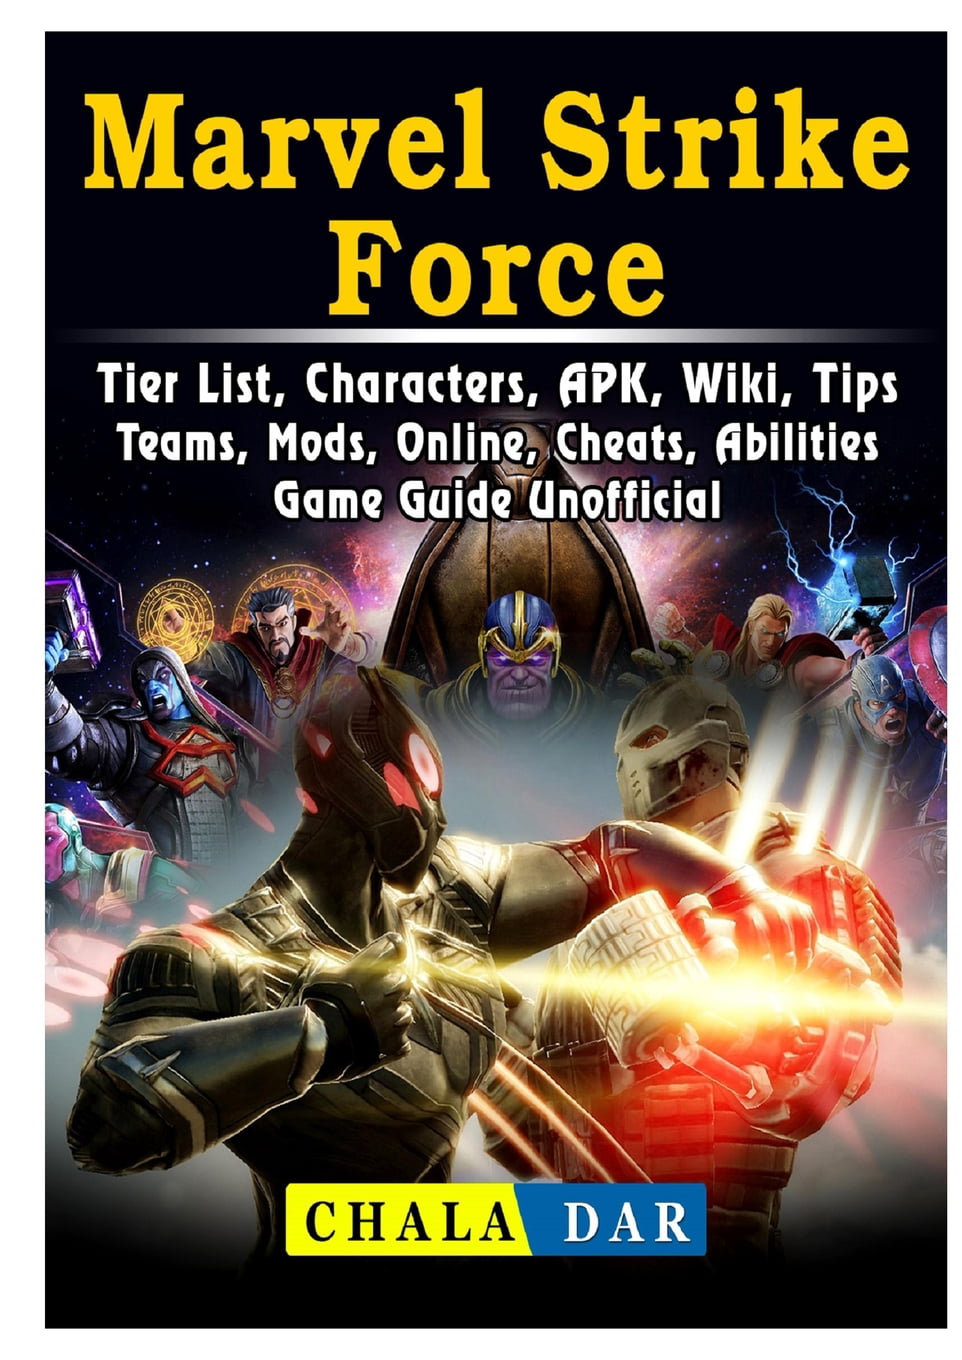 Marvel Strike Force cheats and tips - Everything you need to know about  Gear, Tiers and Abilities